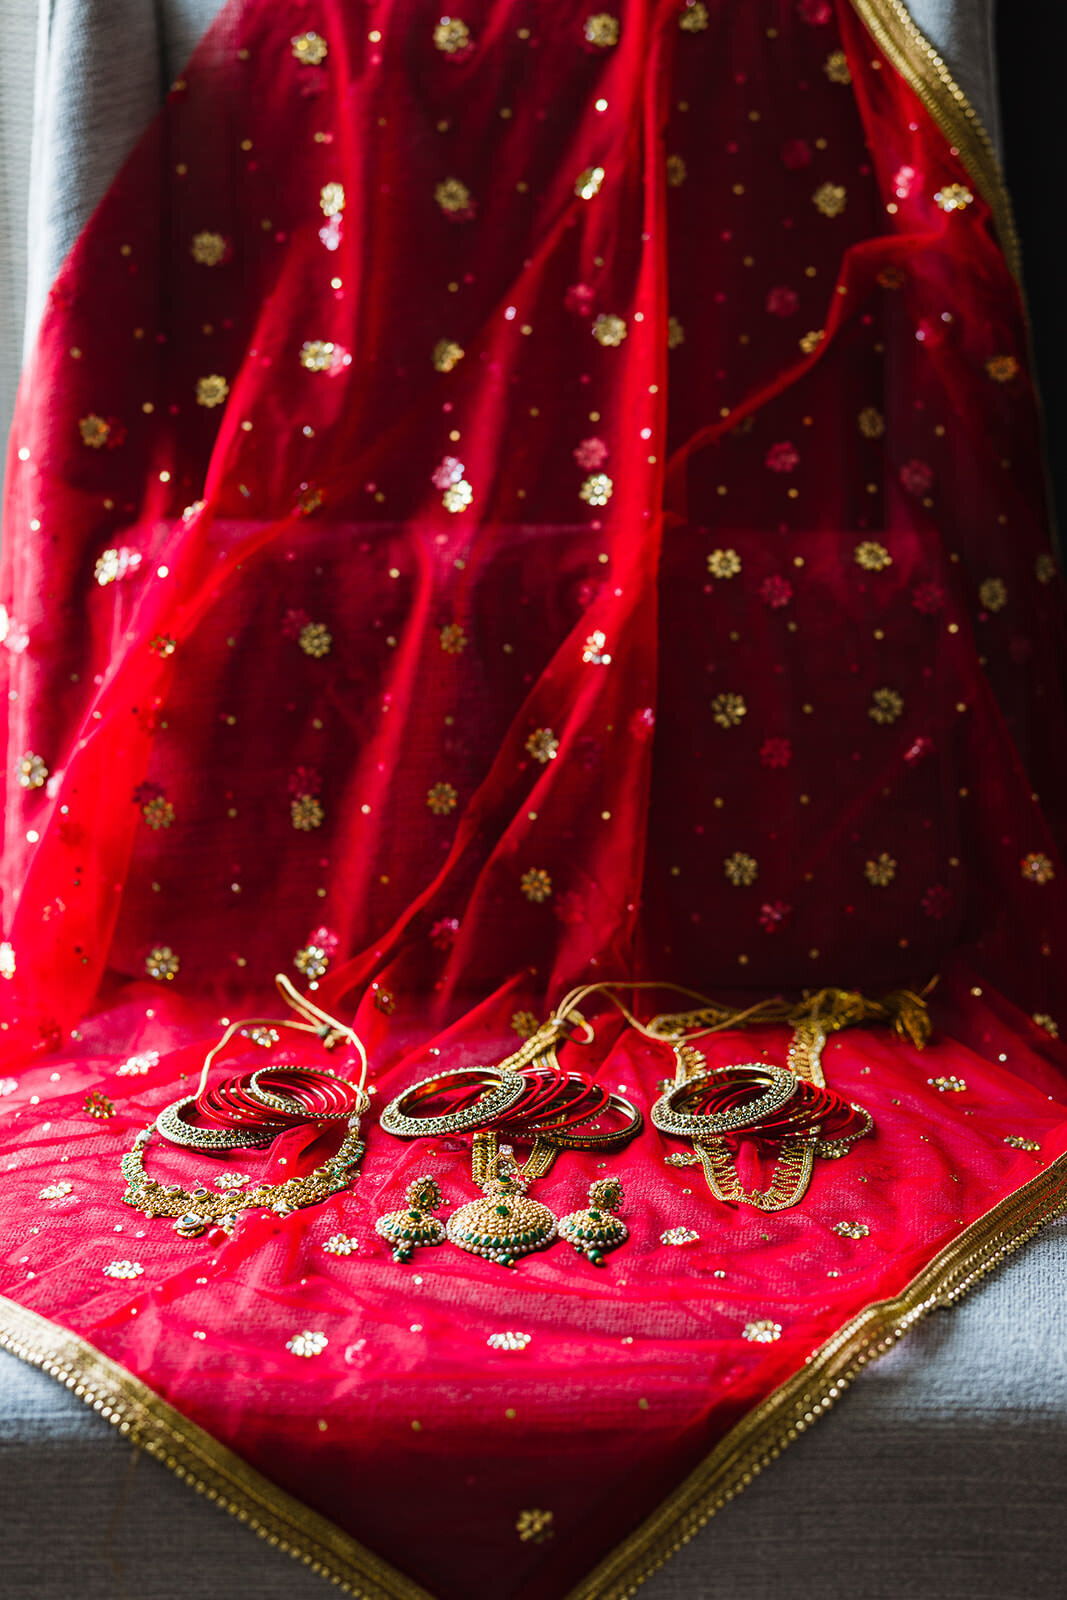 A vibrant red traditional Indian dupatta with golden embroidery and matching jewelry laid out on a fabric surface.